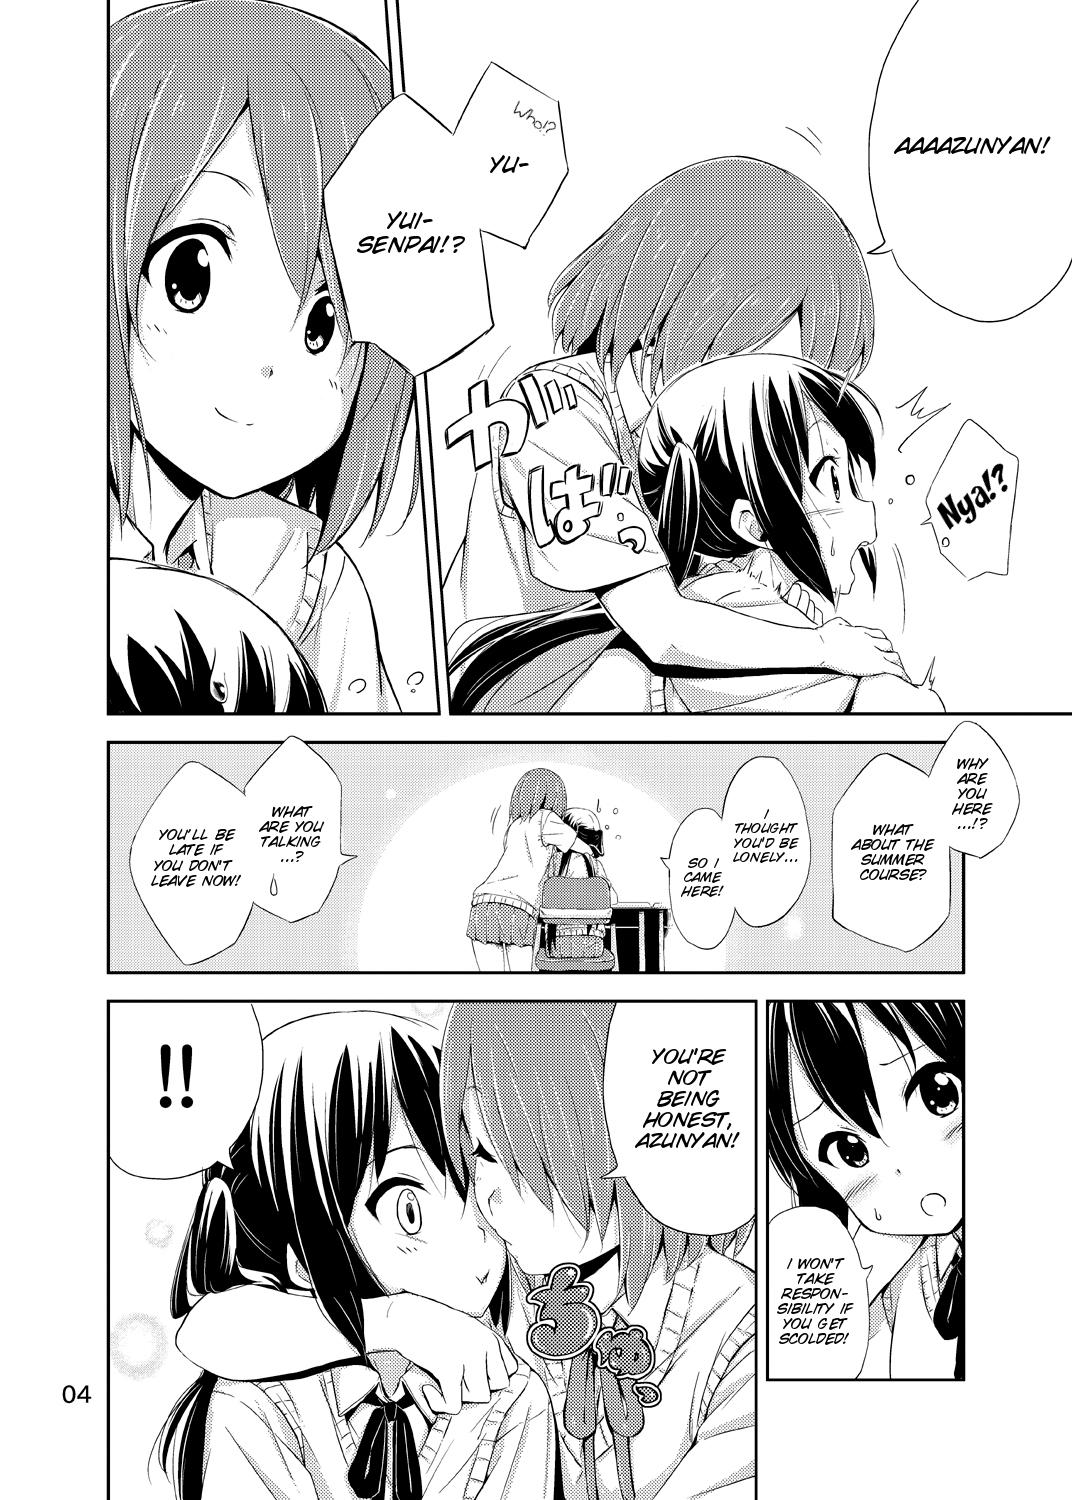 Asian Babes Day dream Believer. - K-on Deflowered - Page 4